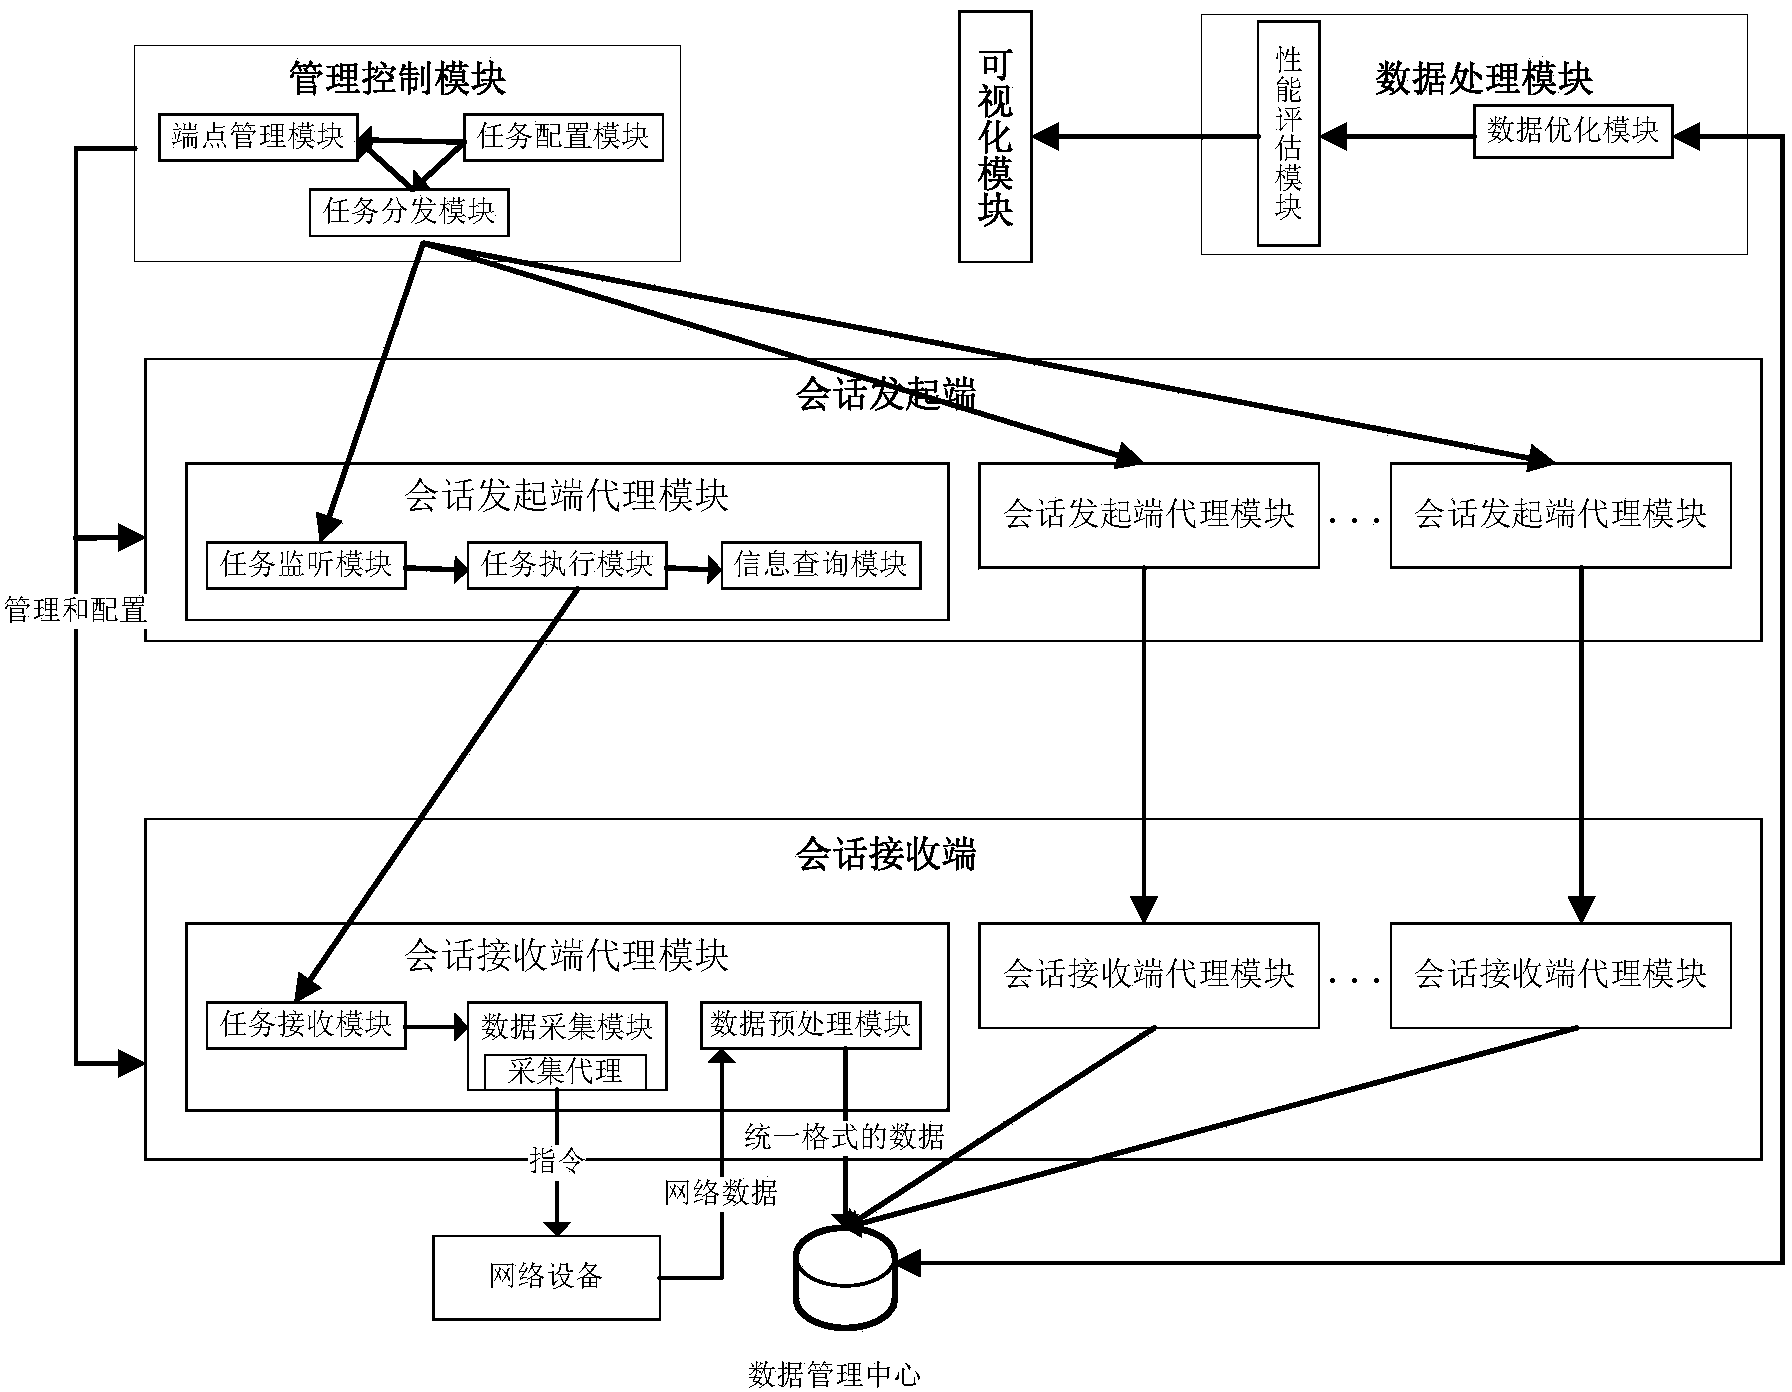 Network security posture information acquisition system and method based on SFLOW and OWAMP (One Way Active Measurement Protocol)